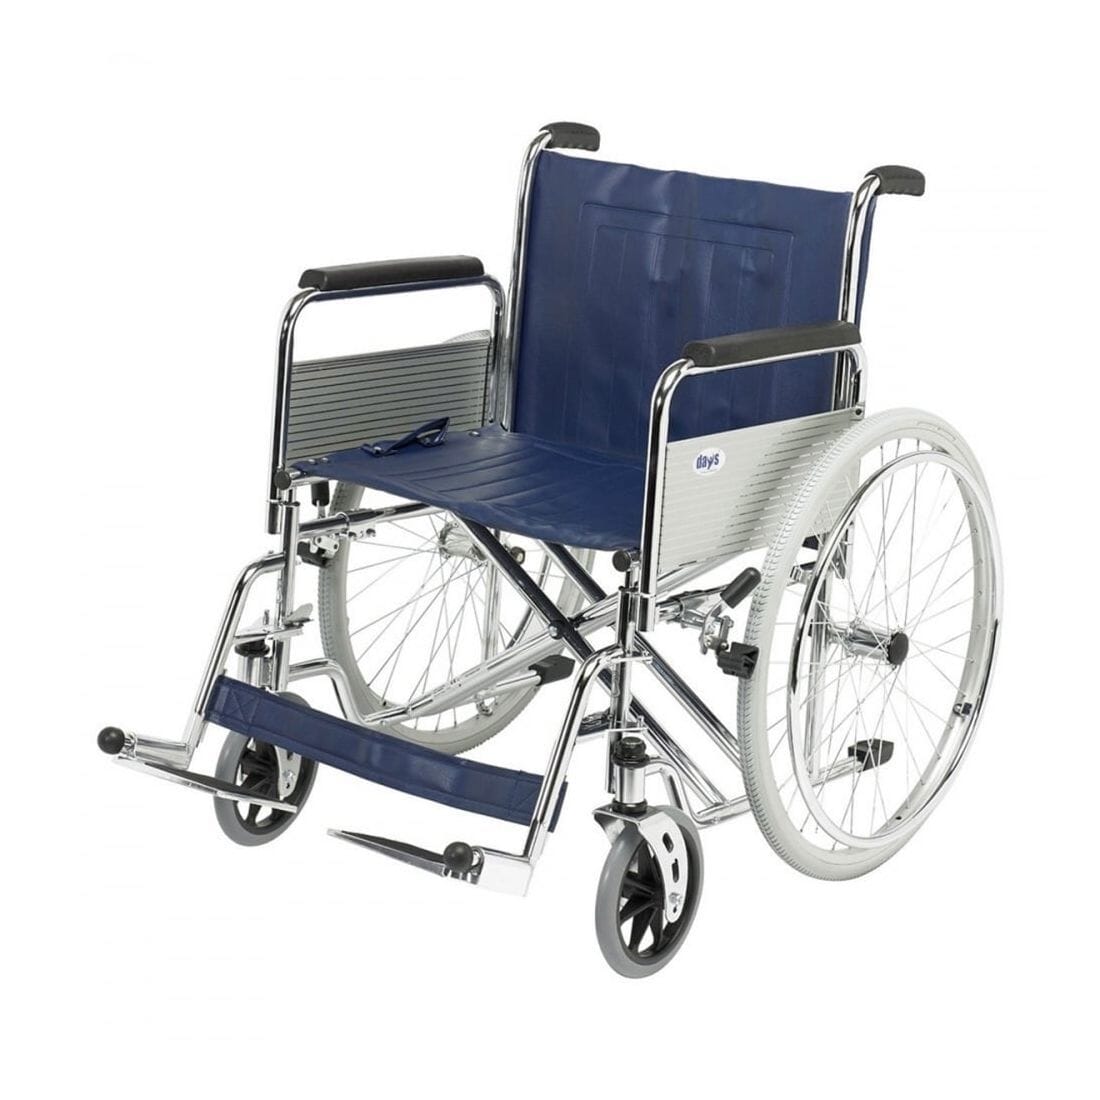 View Days Heavy Duty SelfPropelled Wheelchair With Detachable Armrests and Footrests Pictured information